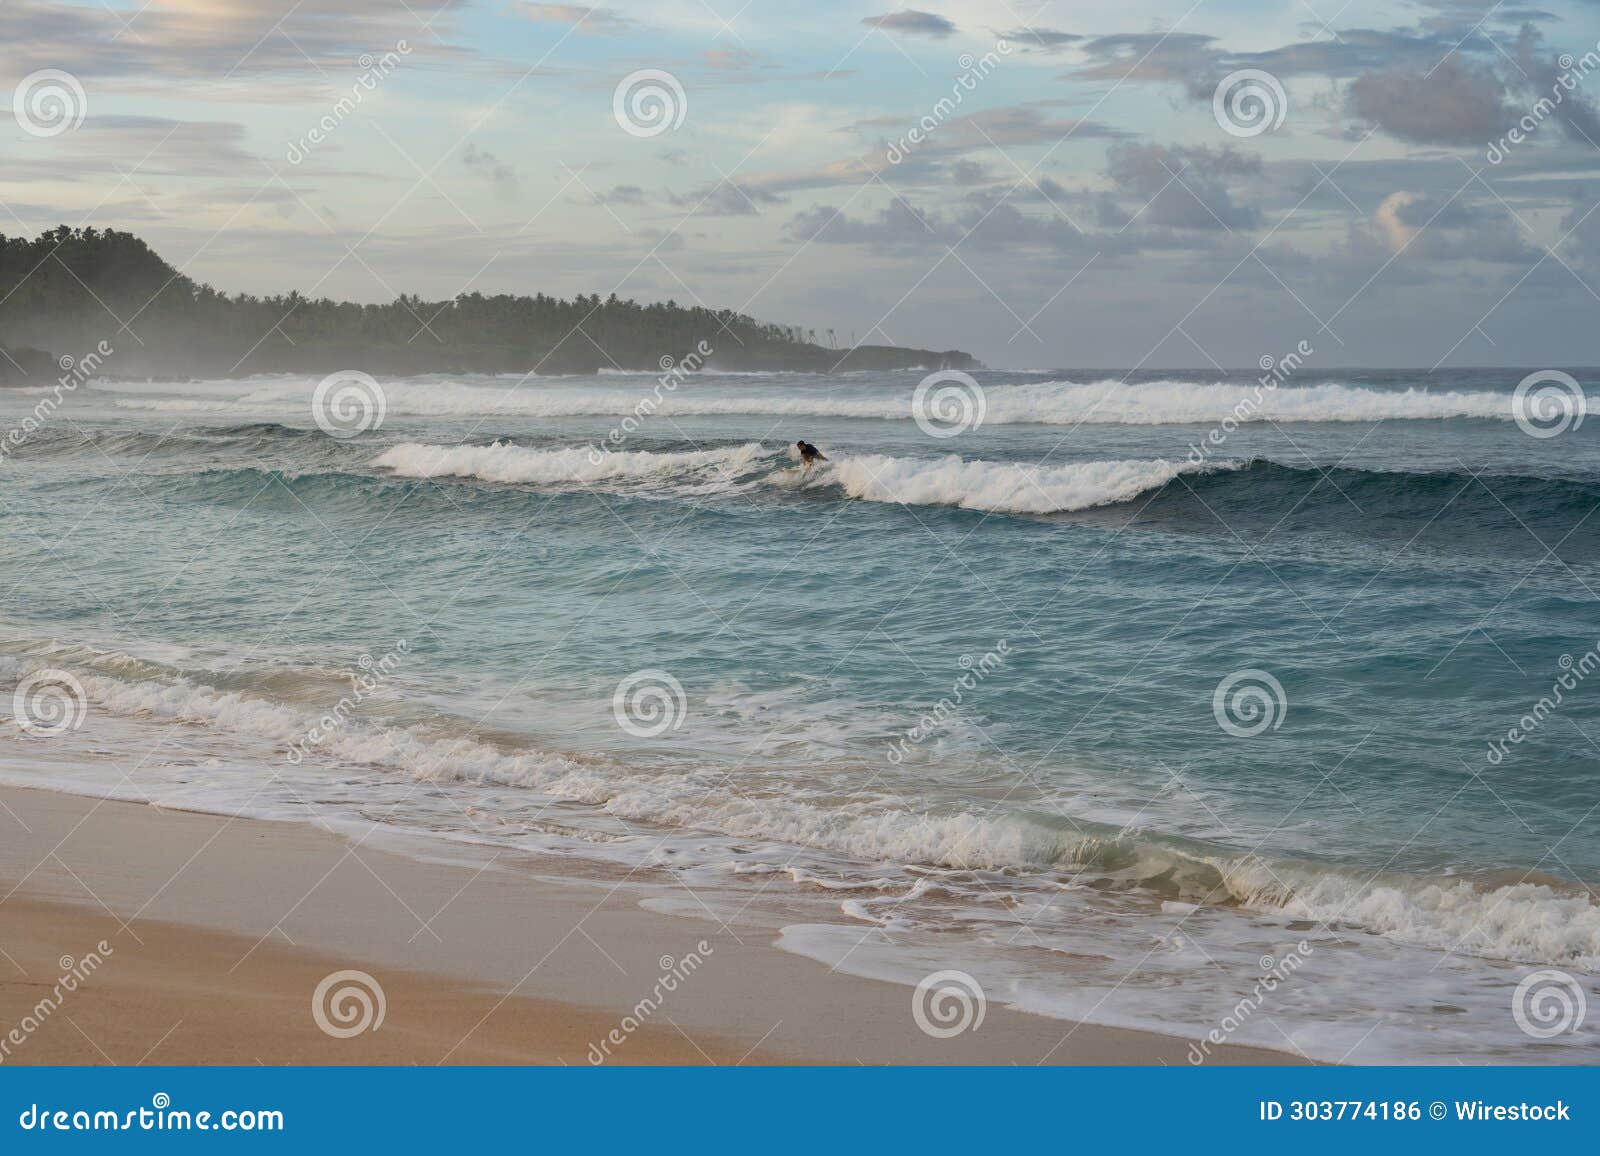 surfer at pacifico beach, siargao, philippines